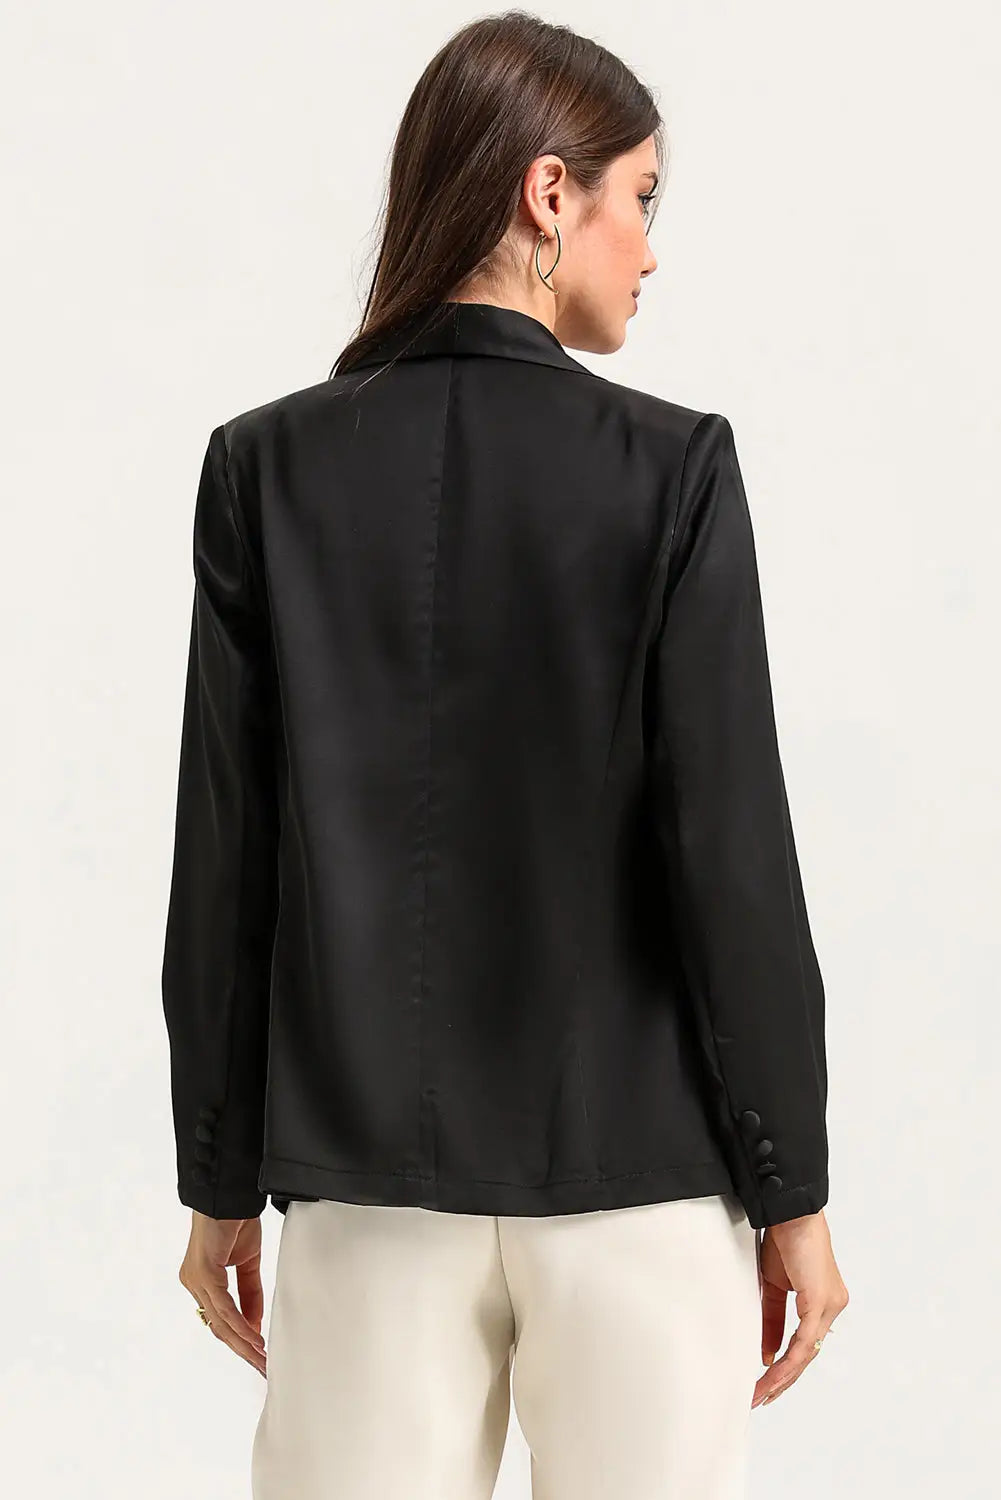 Black collared neck single breasted blazer with pockets - blazers